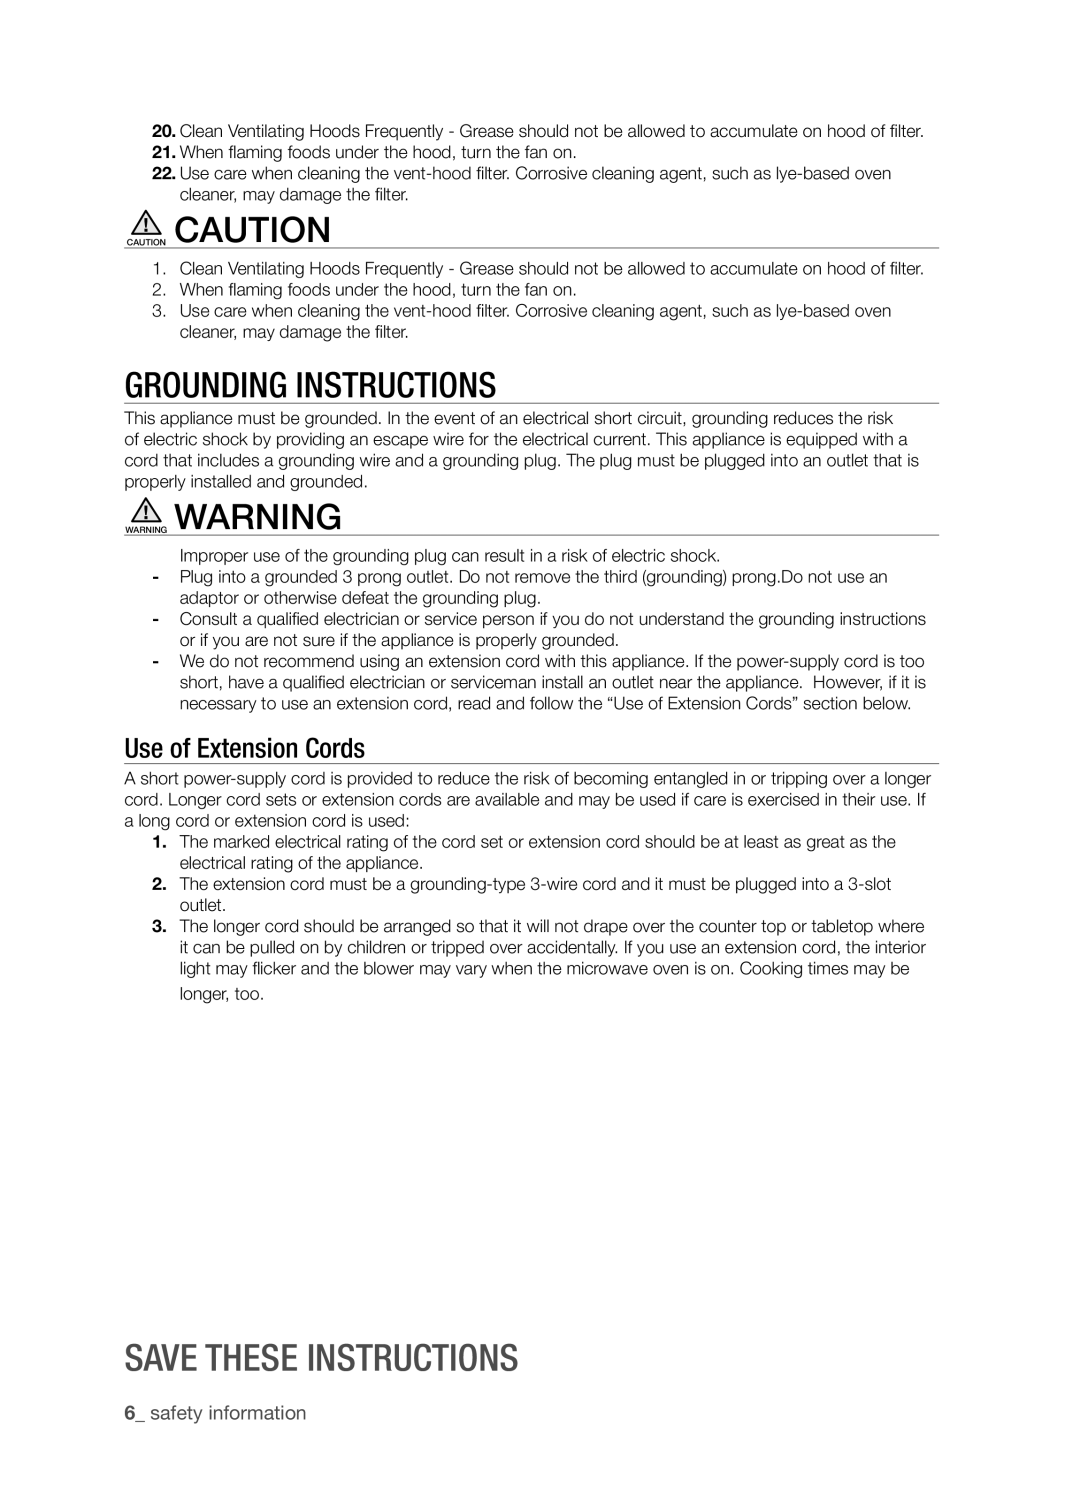 Samsung SMH8165STE user manual Grounding Instructions, Save these instructions, Use of Extension Cords, safety information 